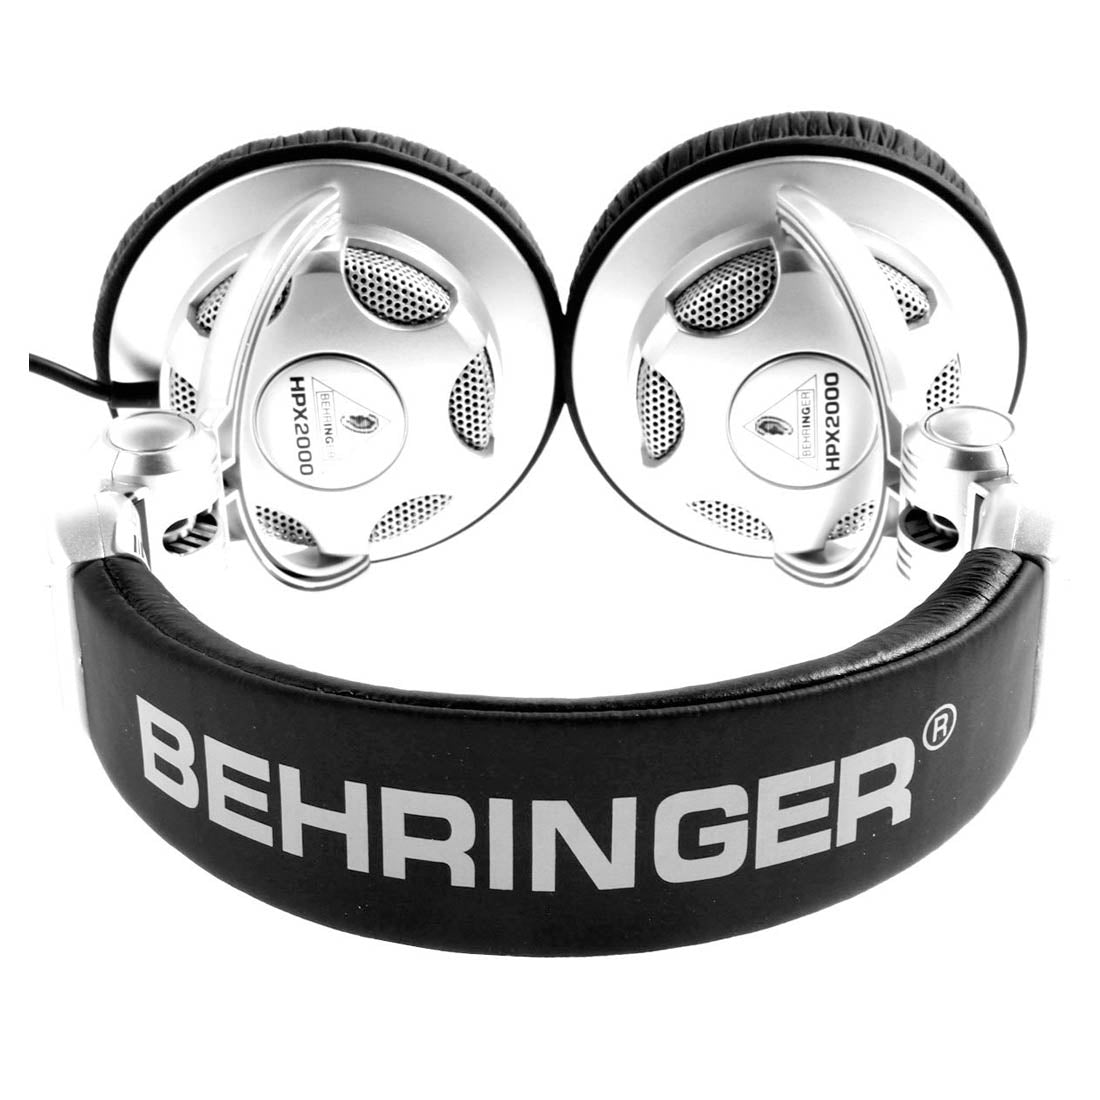 Behringer HPX2000 High-Definition Wired DJ Headphone with Ultra-high Dynamic Range